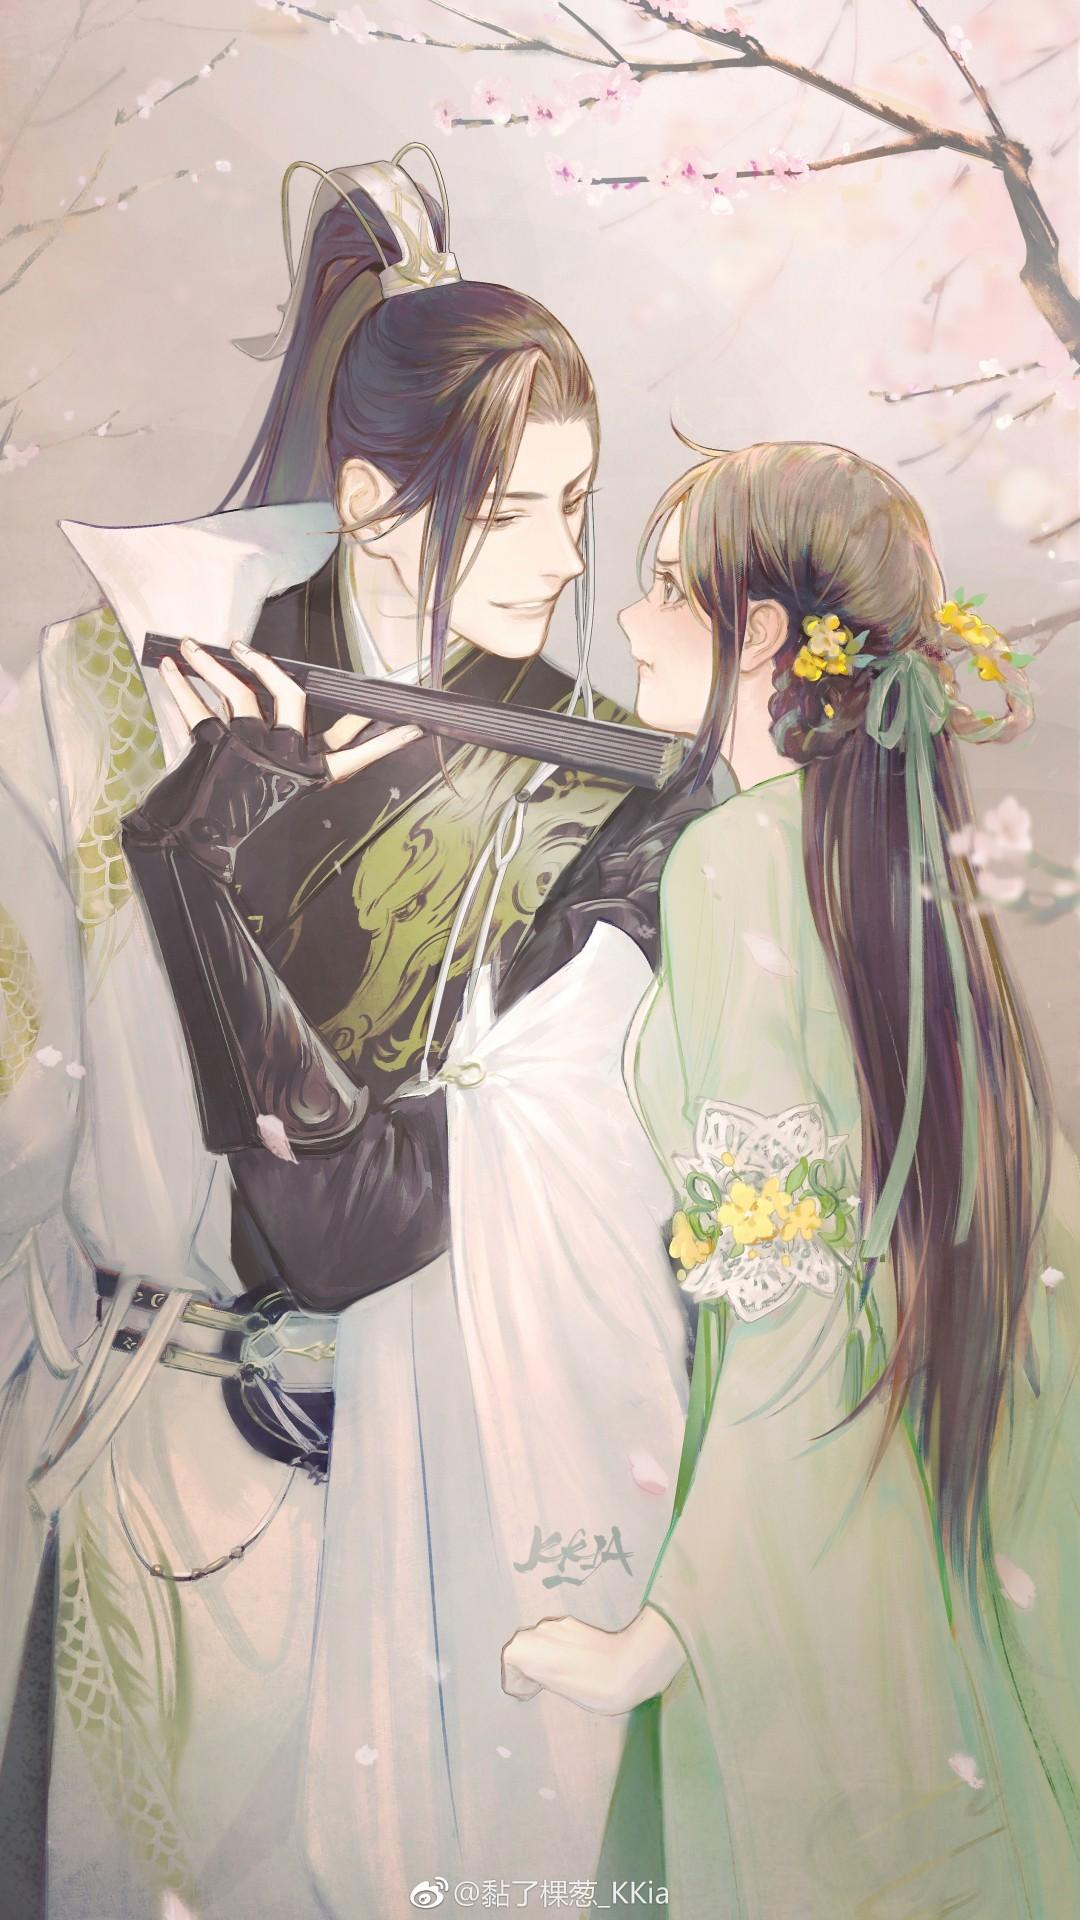 Download 1080x1920 Anime Couple, Romance, Chinese Clothes